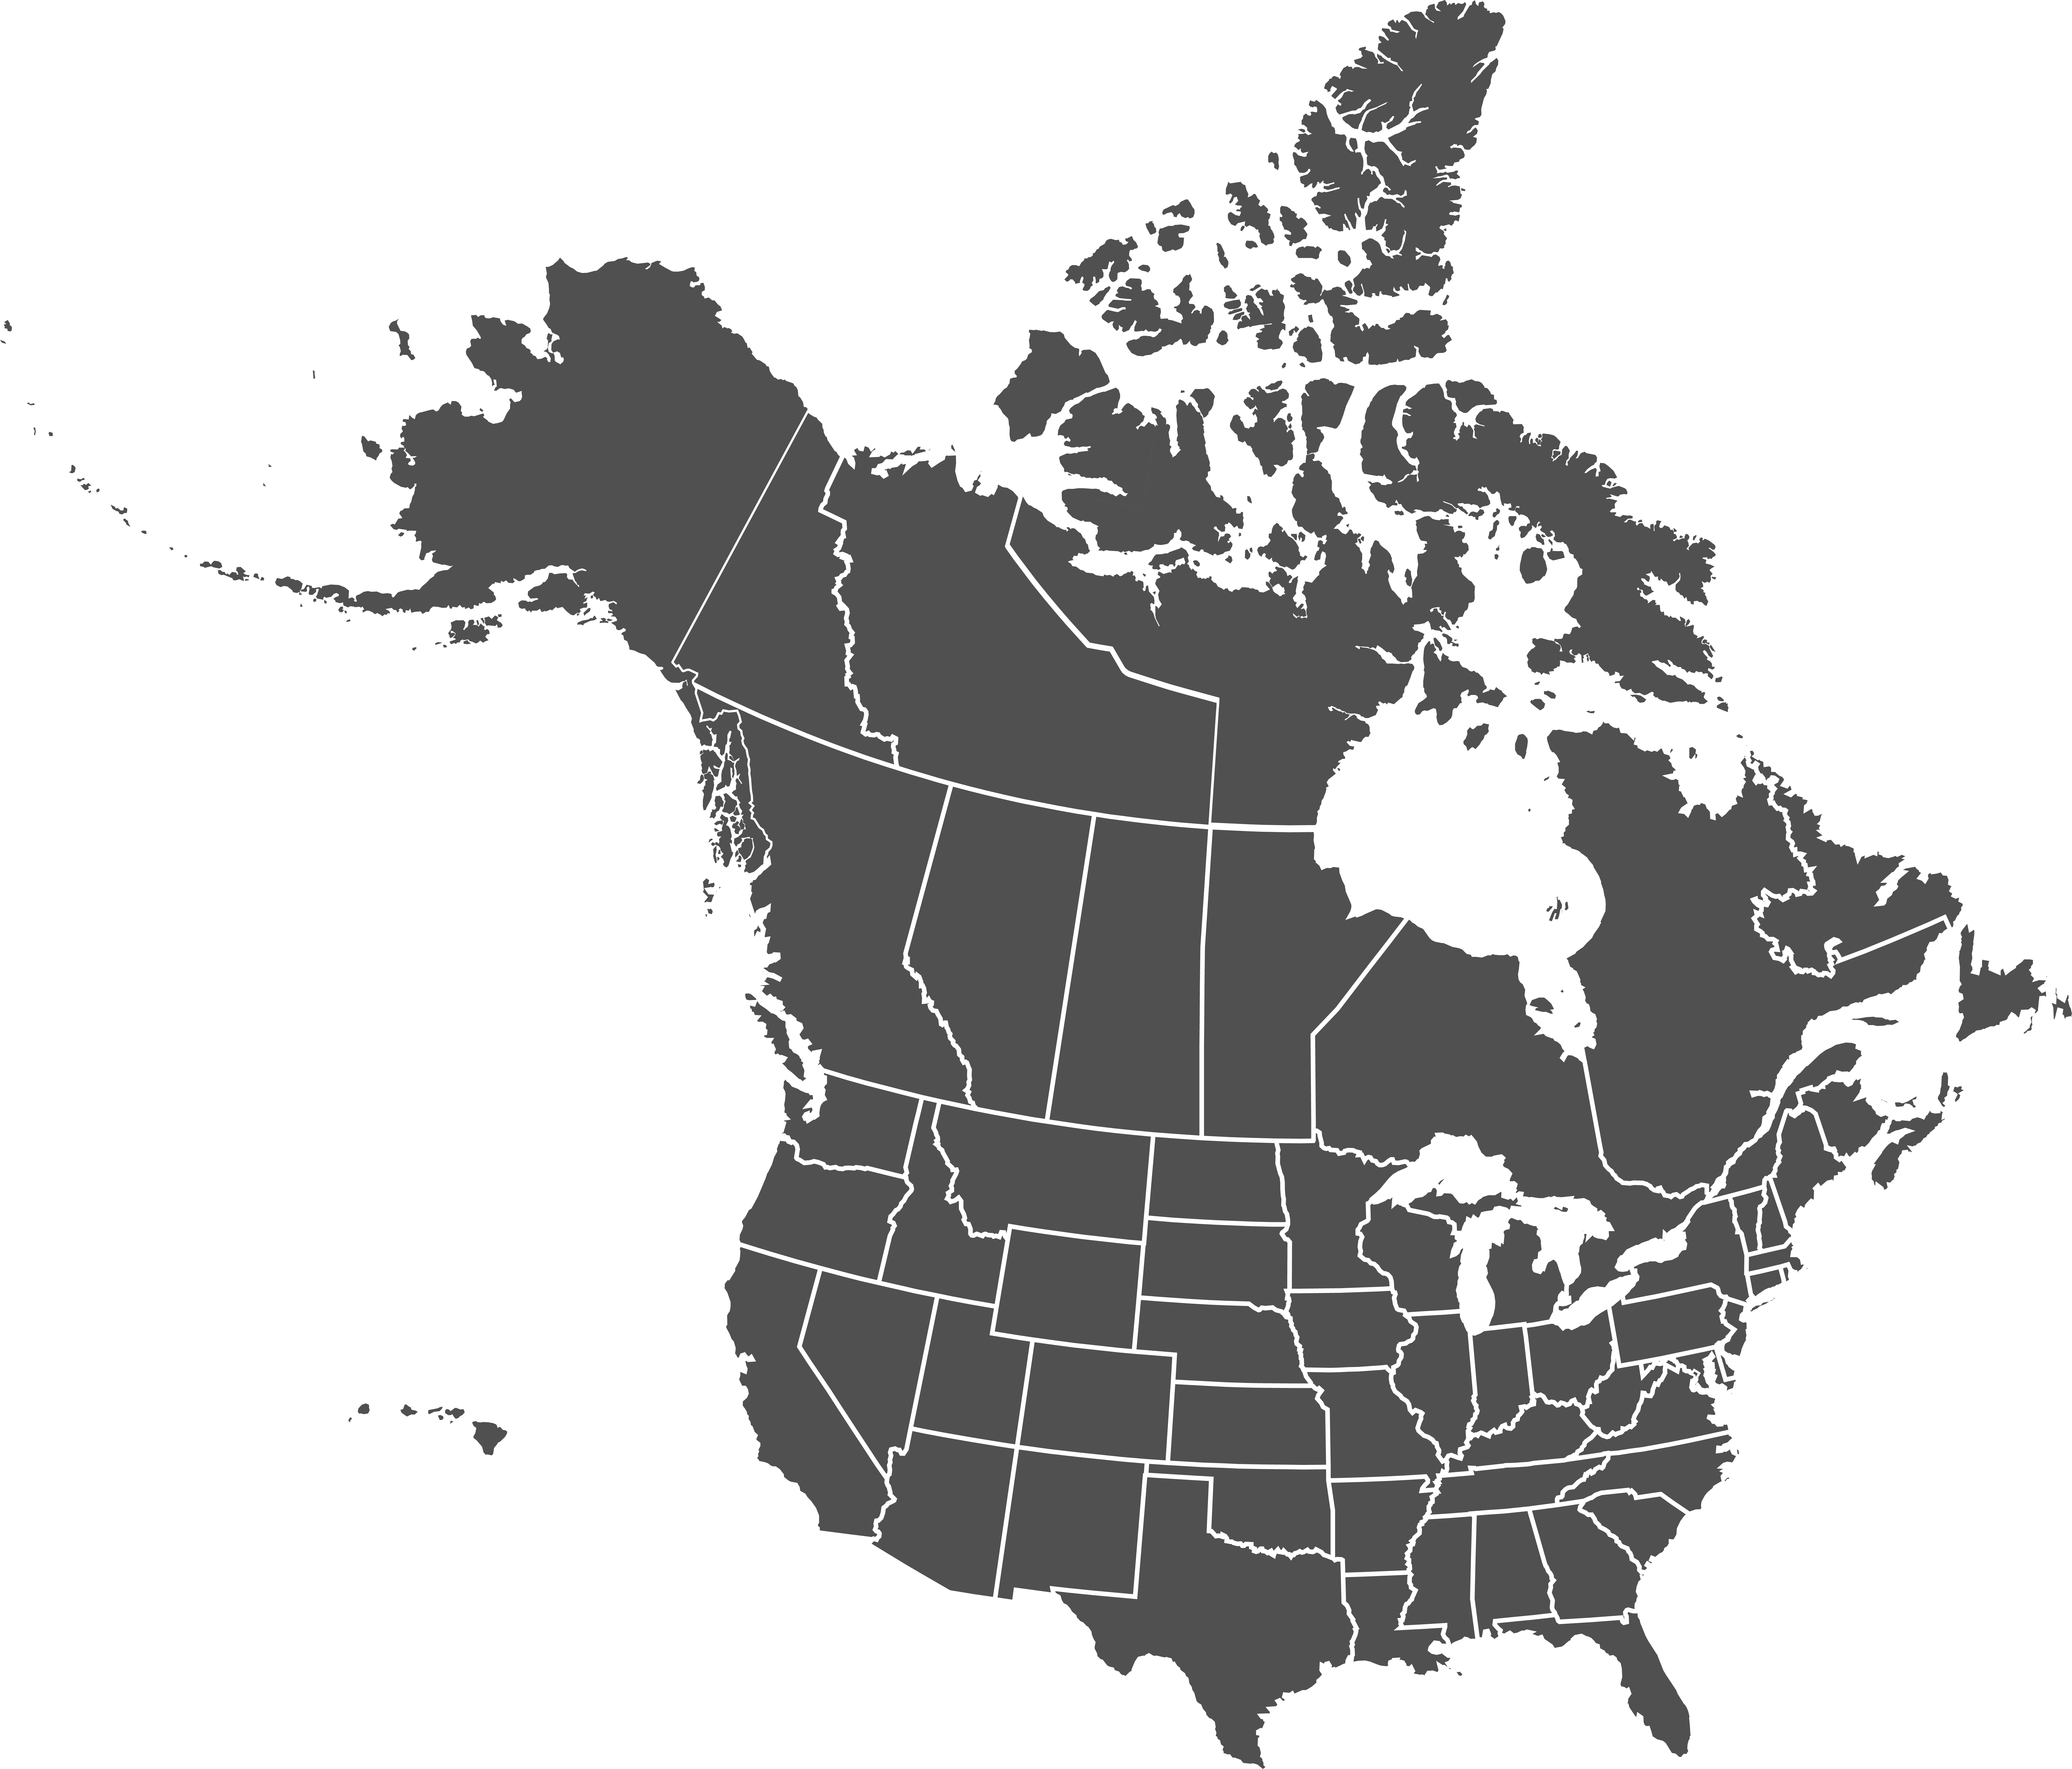 Gray vector map of the United States